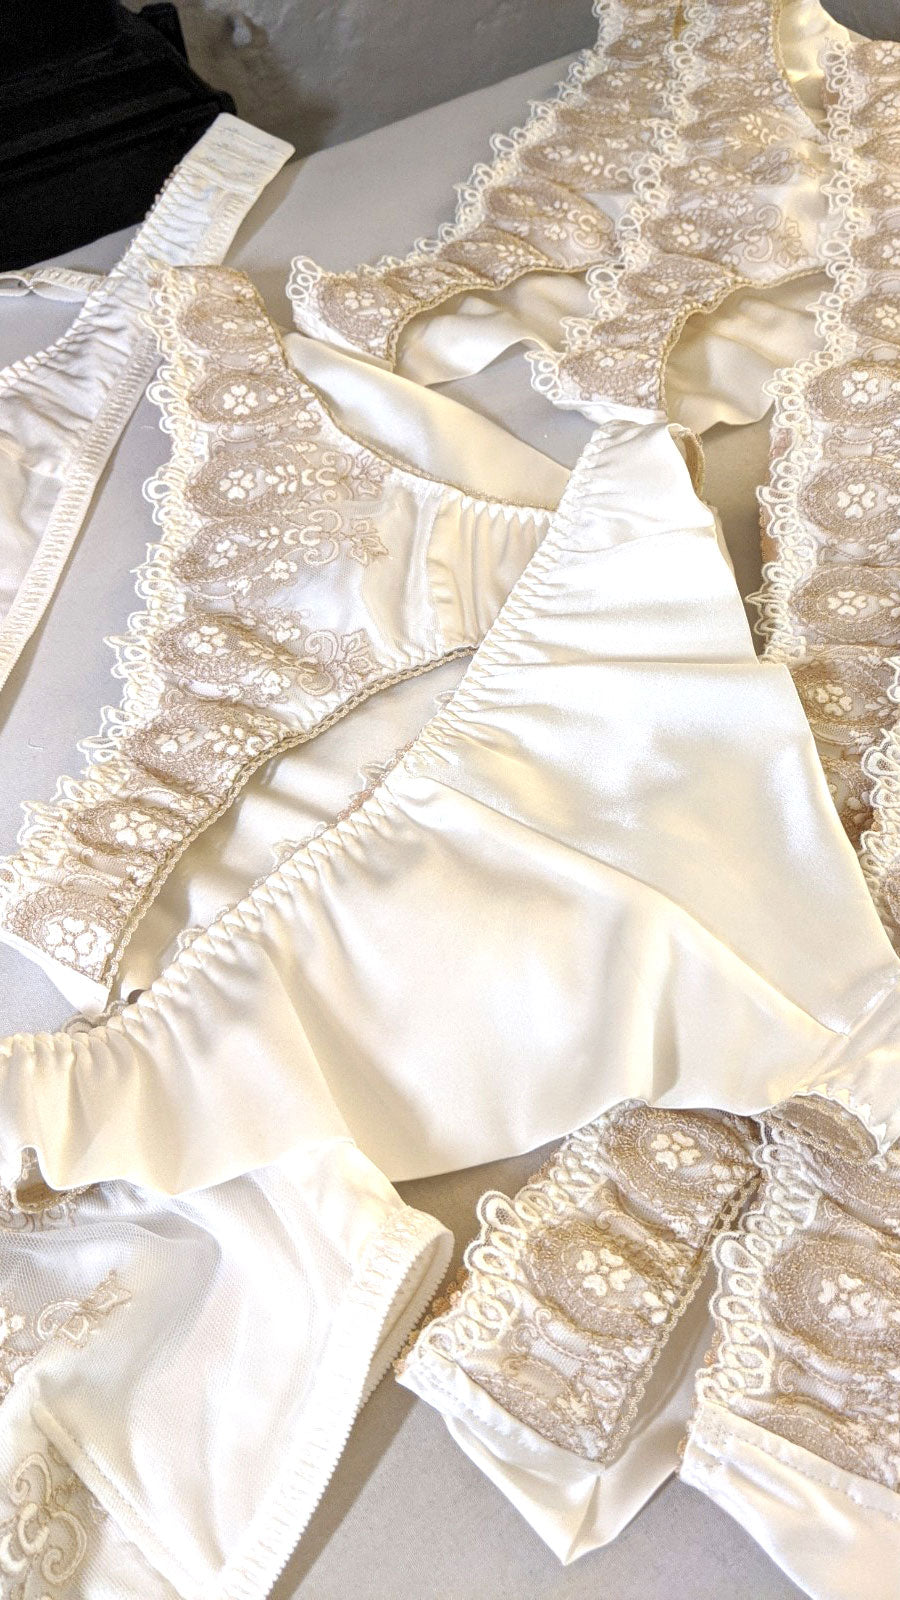 White silk knickers for brides and honeymoon lingerie